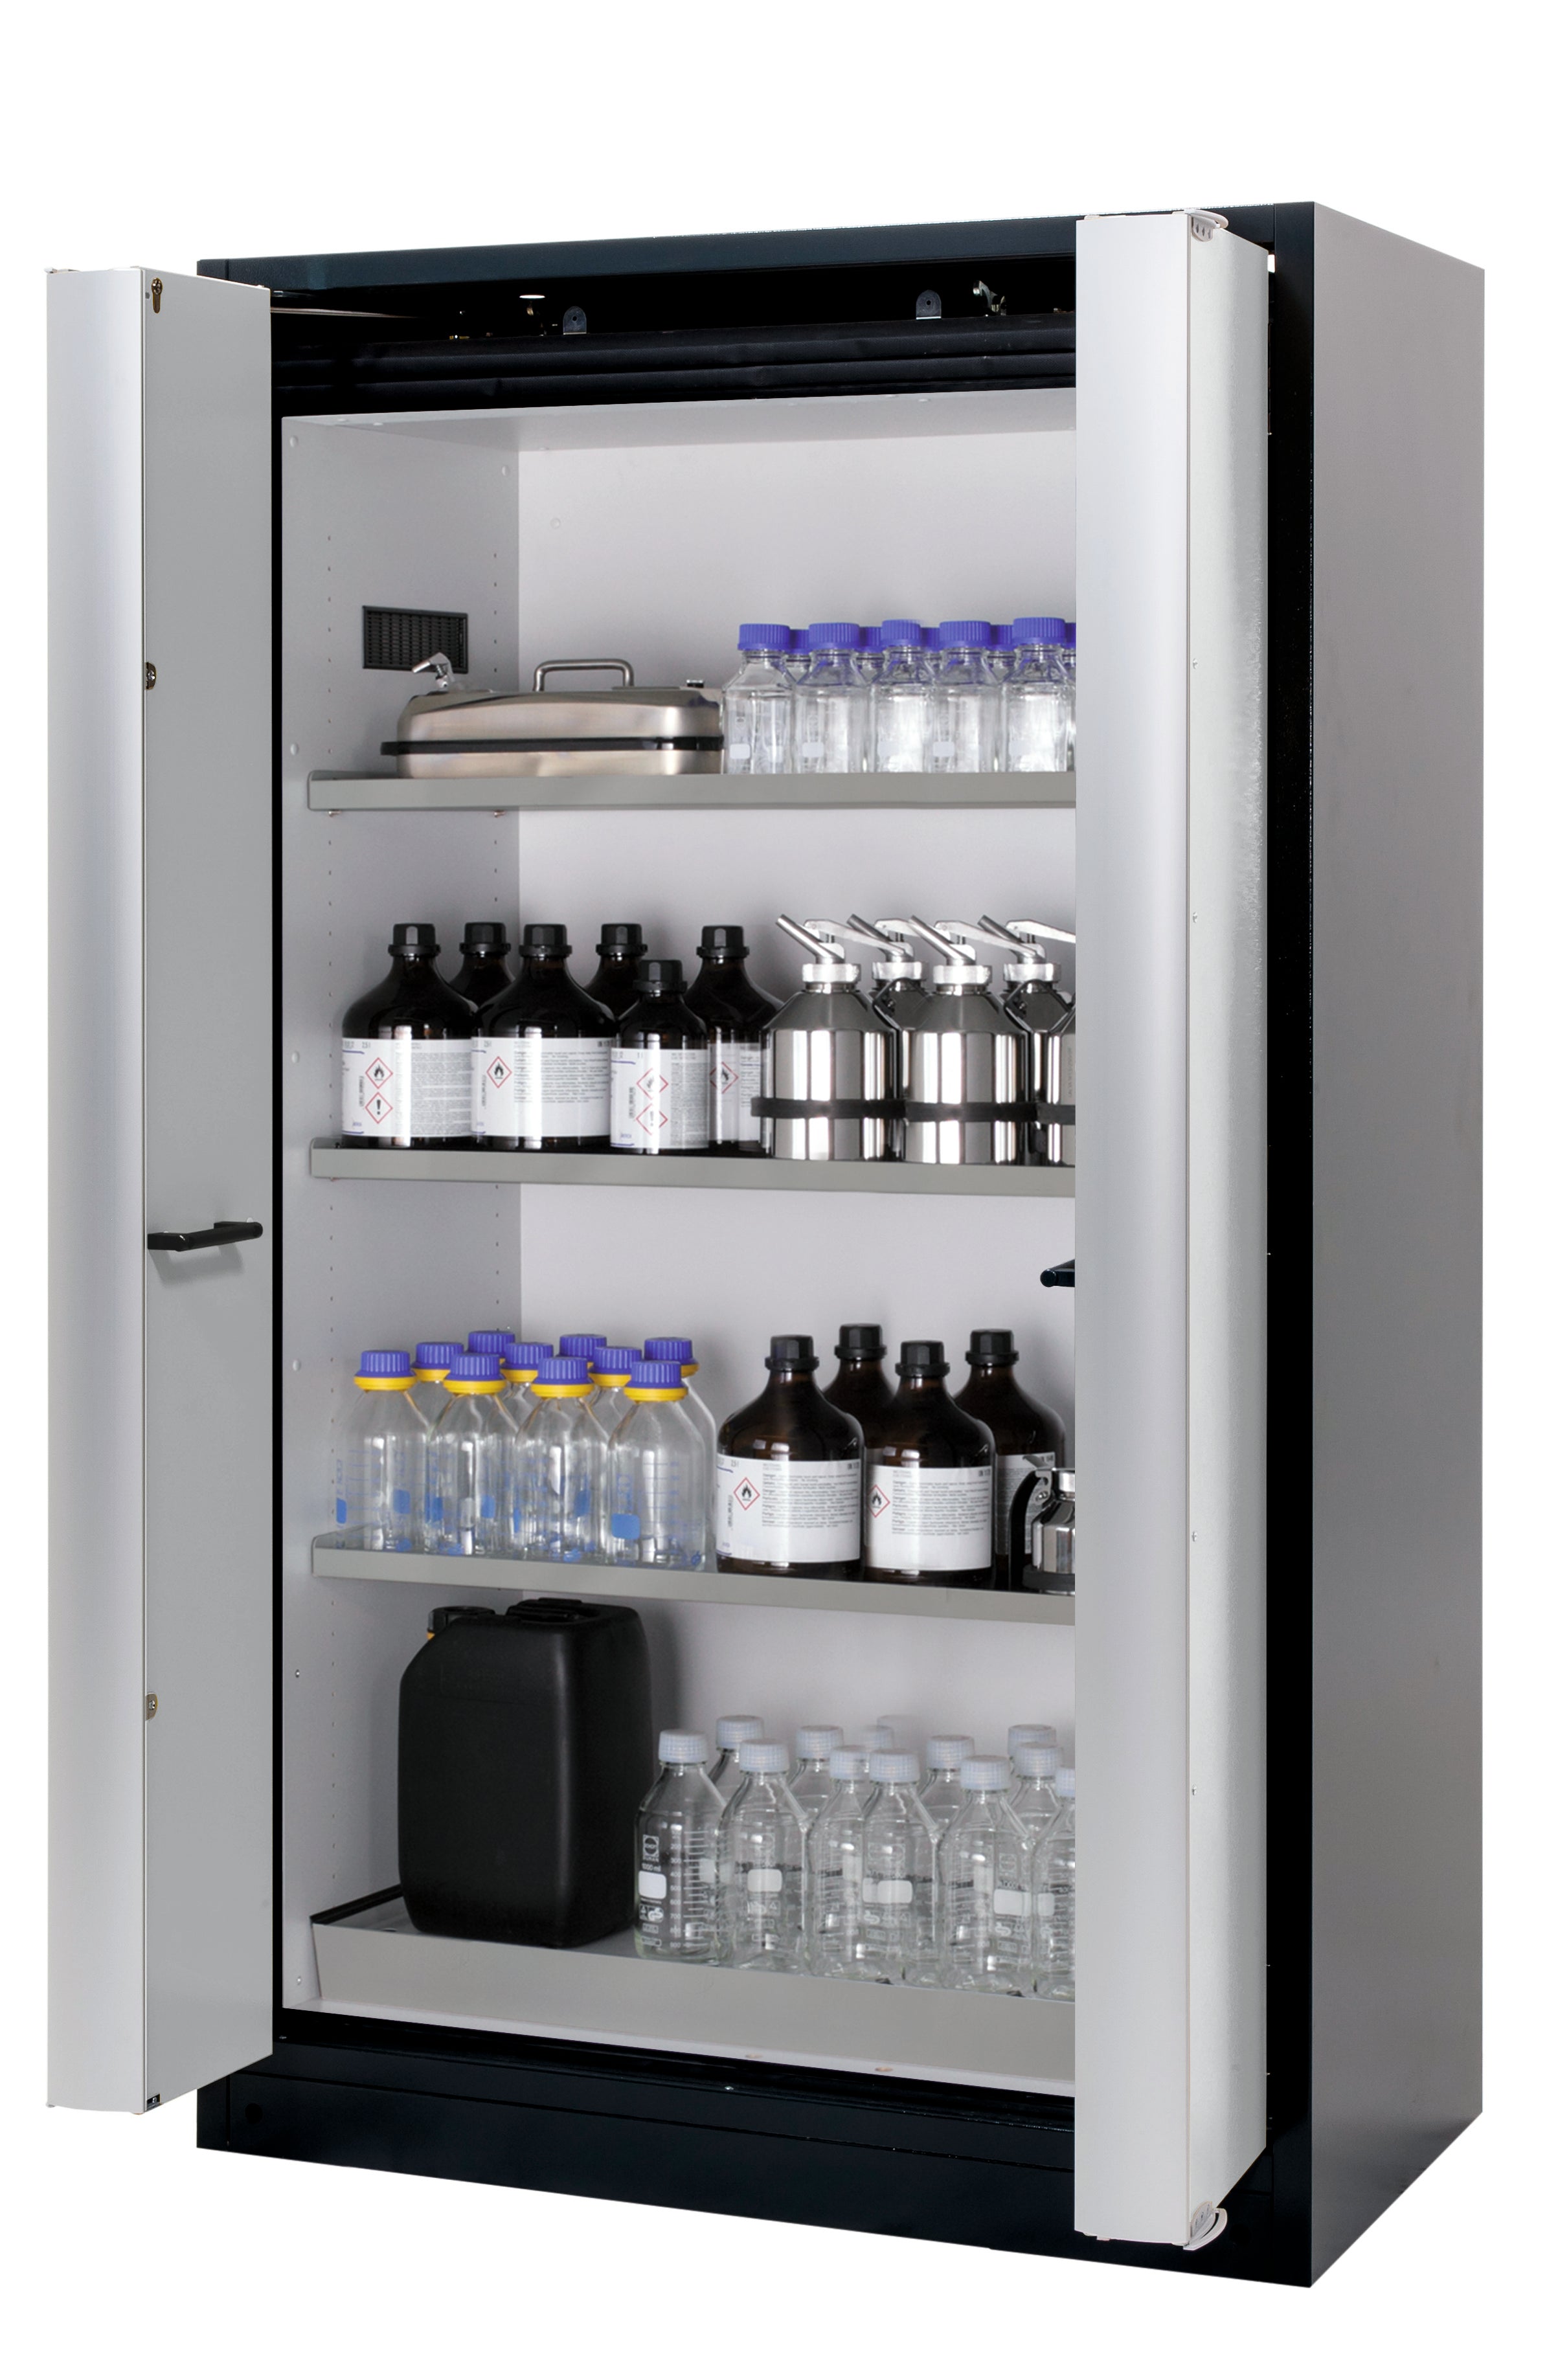 Type 90 safety cabinet Q-PHOENIX-90 model Q90.195.120.FD in light gray RAL 7035 with 3x standard shelves (stainless steel 1.4301)